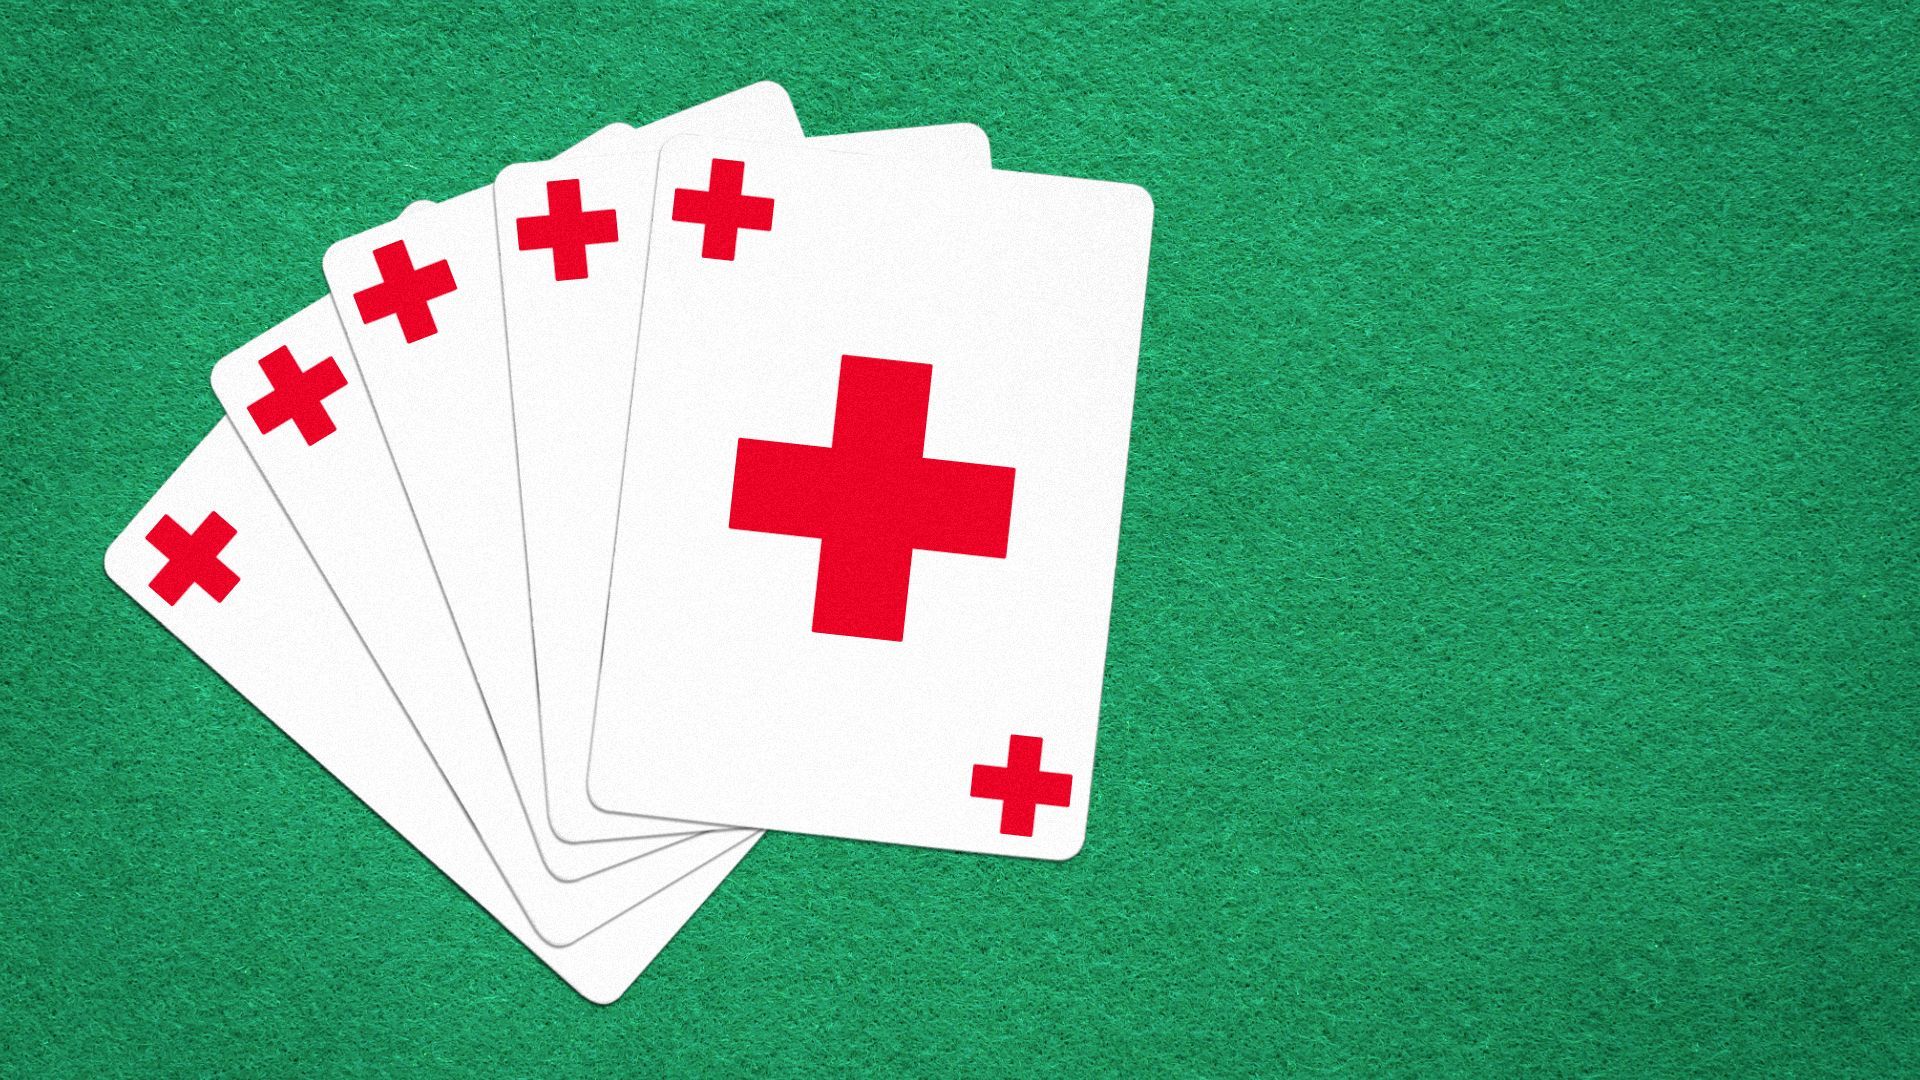 Illustration of a red cross design on playing cards.